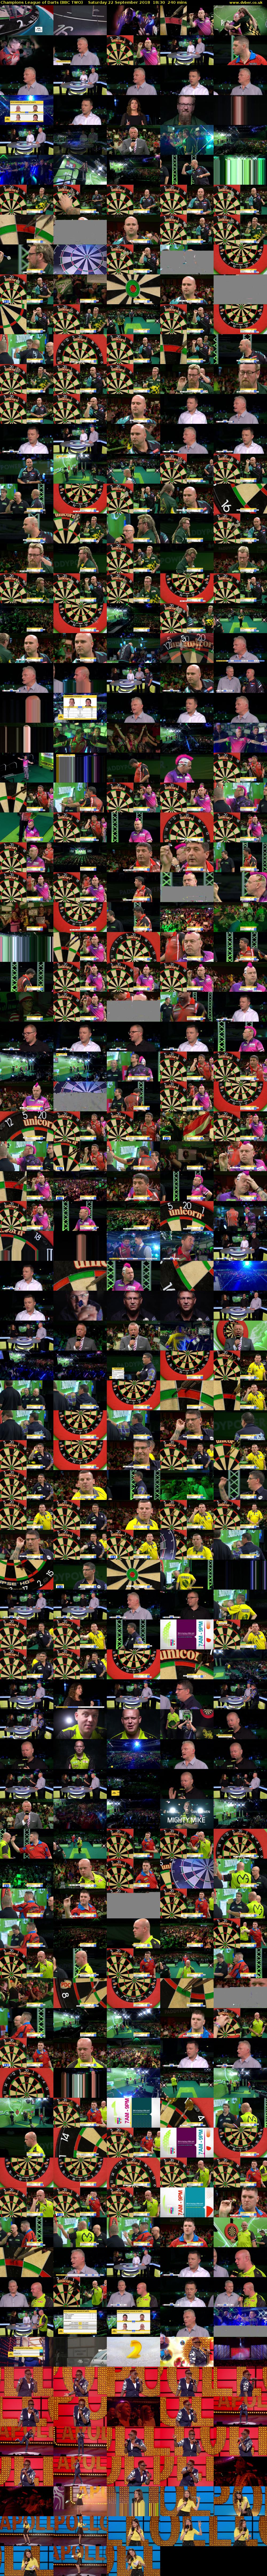 Champions League of Darts (BBC TWO) Saturday 22 September 2018 18:30 - 22:30